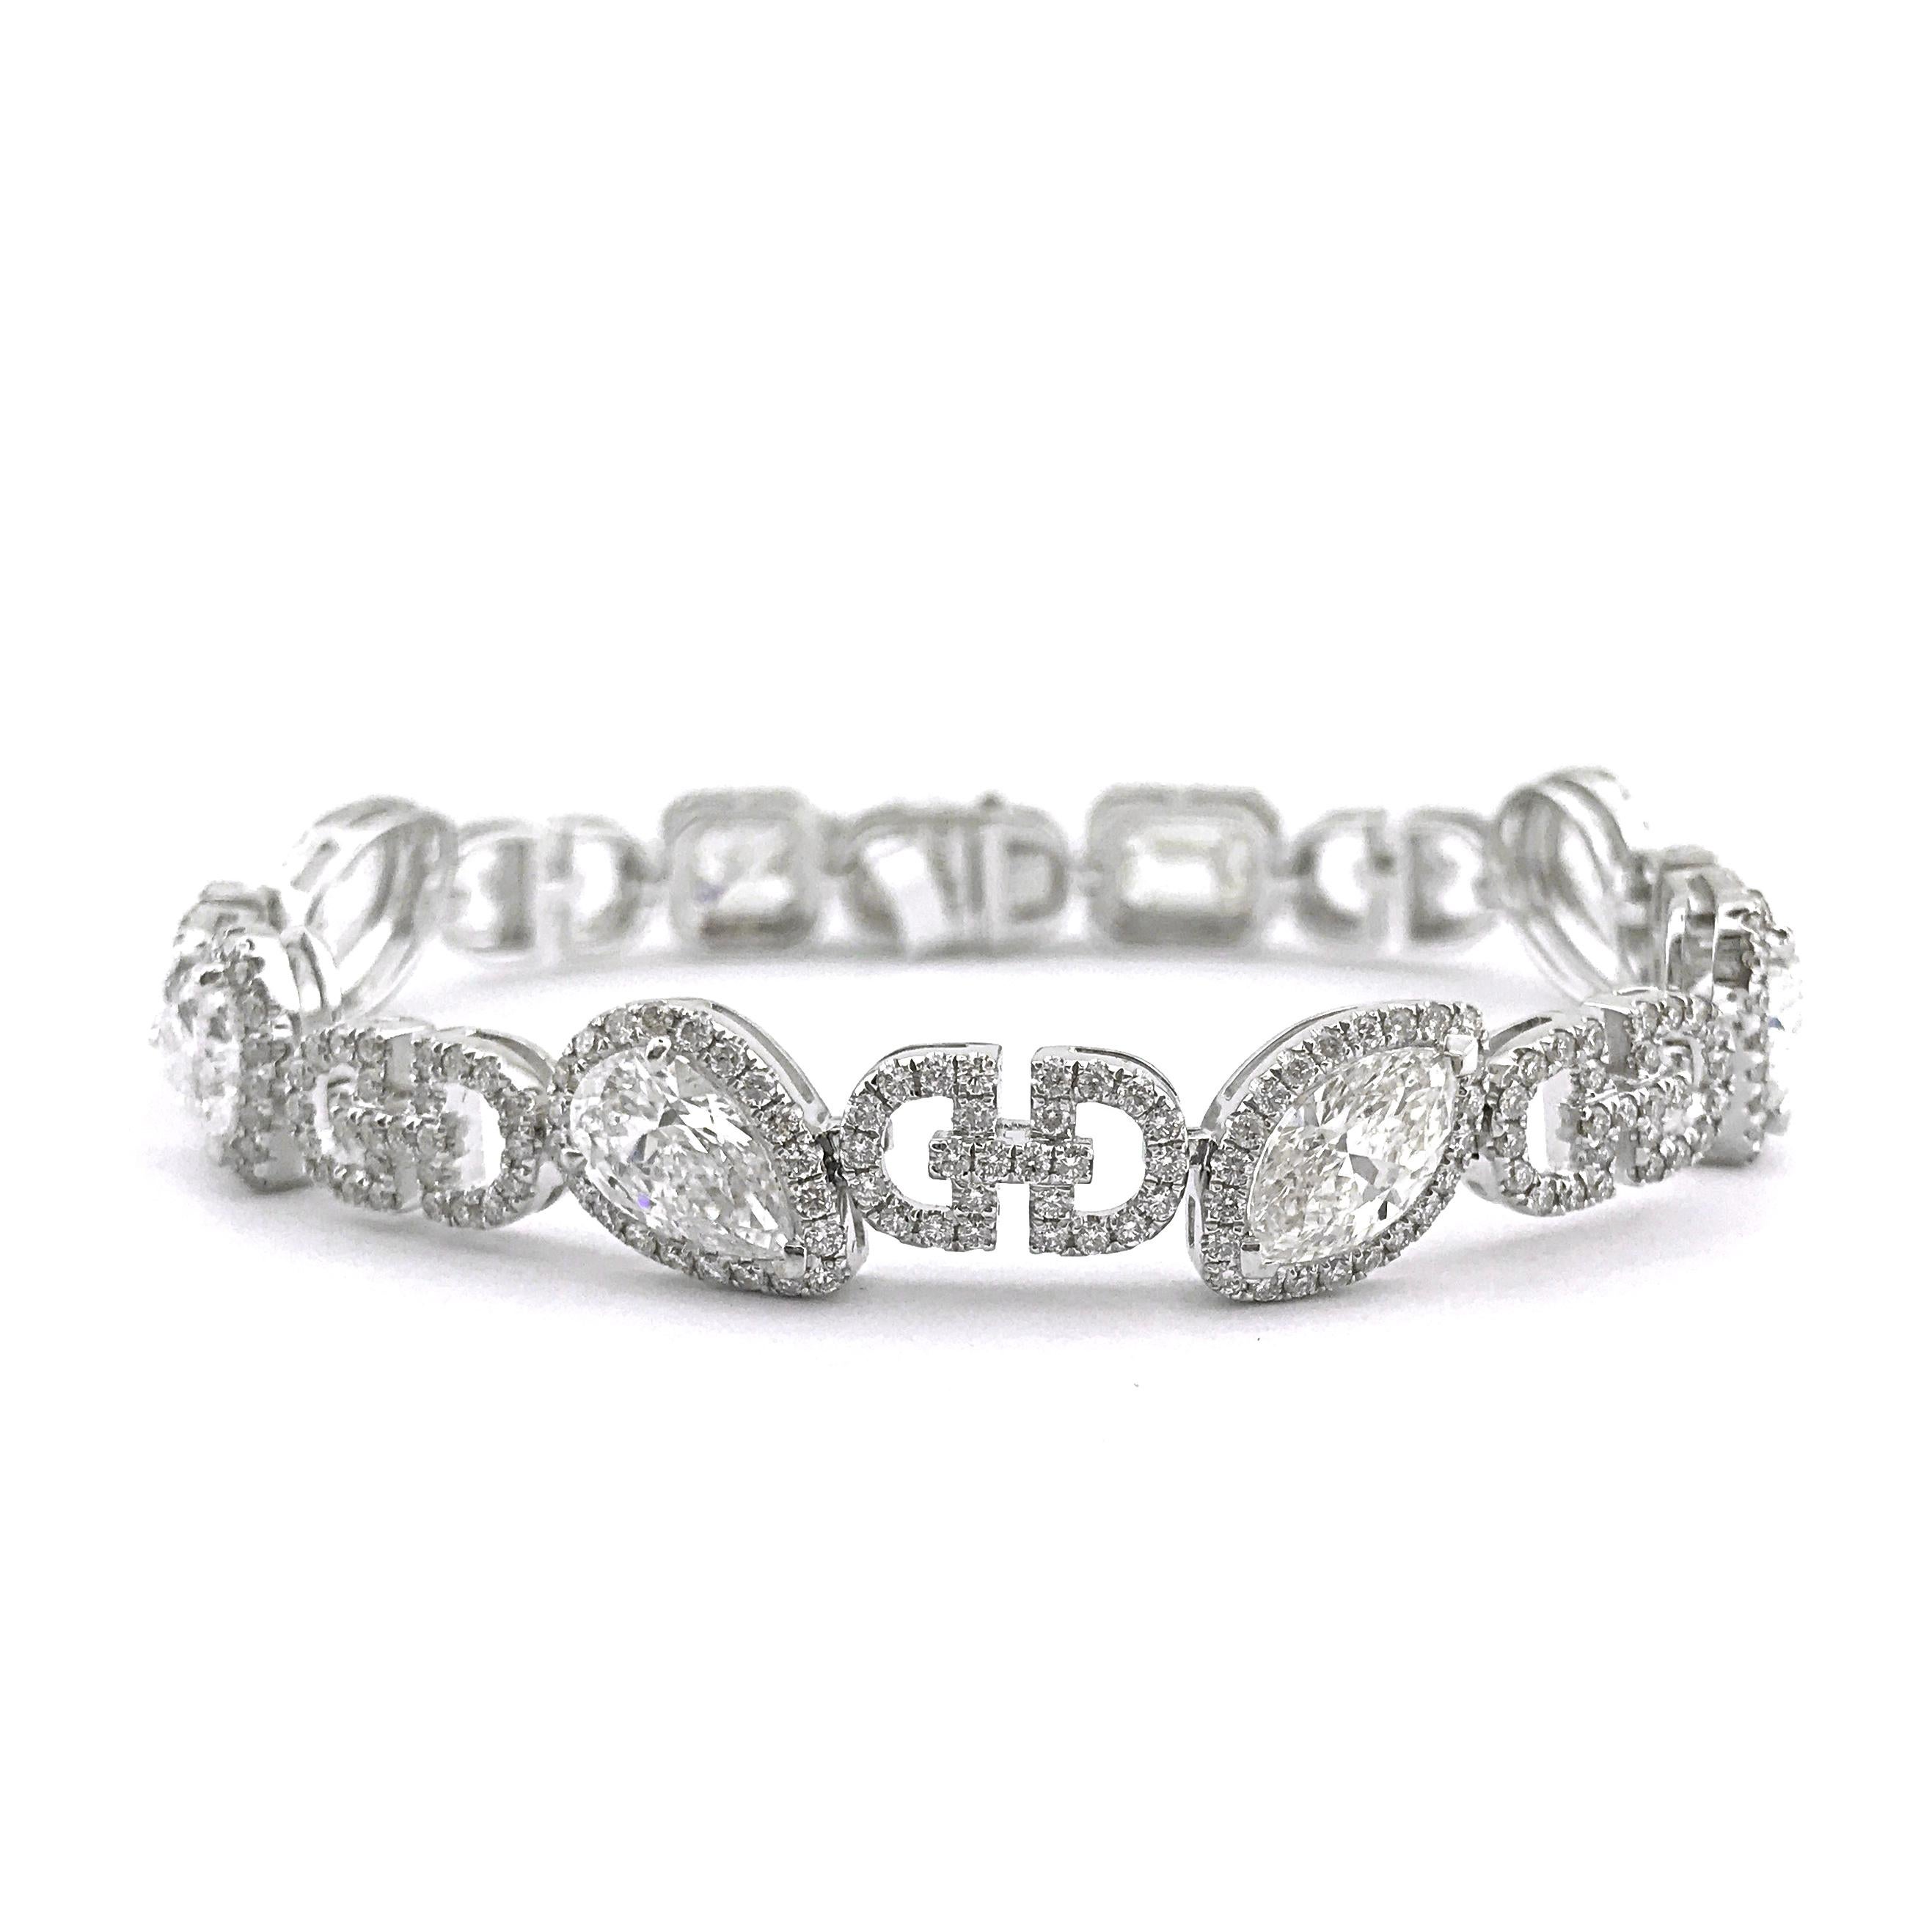 GIA Certified Mixed Cut Diamond Bracelet, 11.41 Carat In Excellent Condition For Sale In Knightsbridge, GB